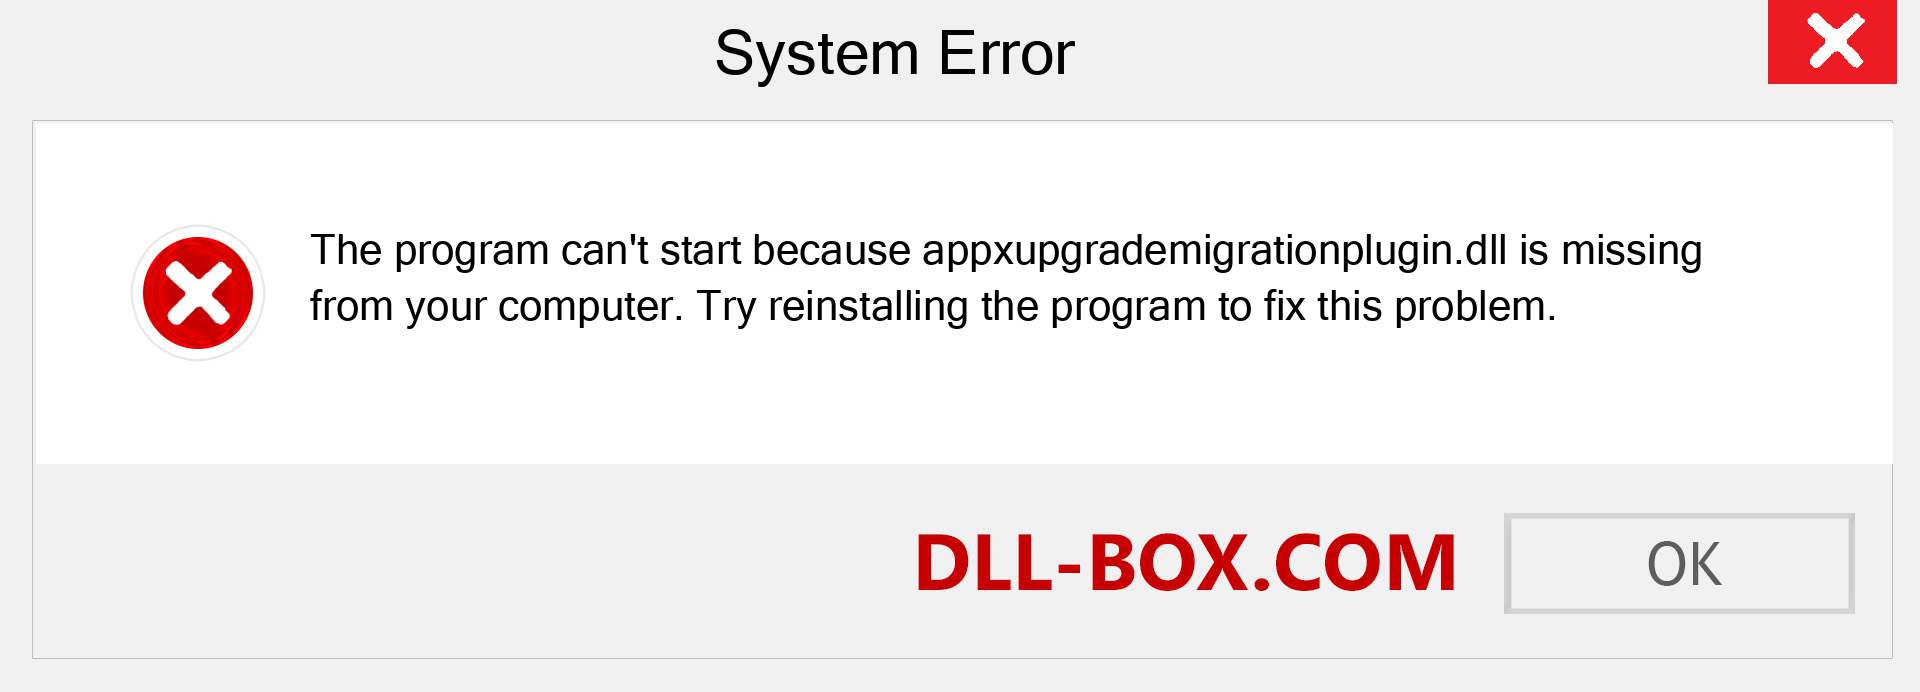  appxupgrademigrationplugin.dll file is missing?. Download for Windows 7, 8, 10 - Fix  appxupgrademigrationplugin dll Missing Error on Windows, photos, images